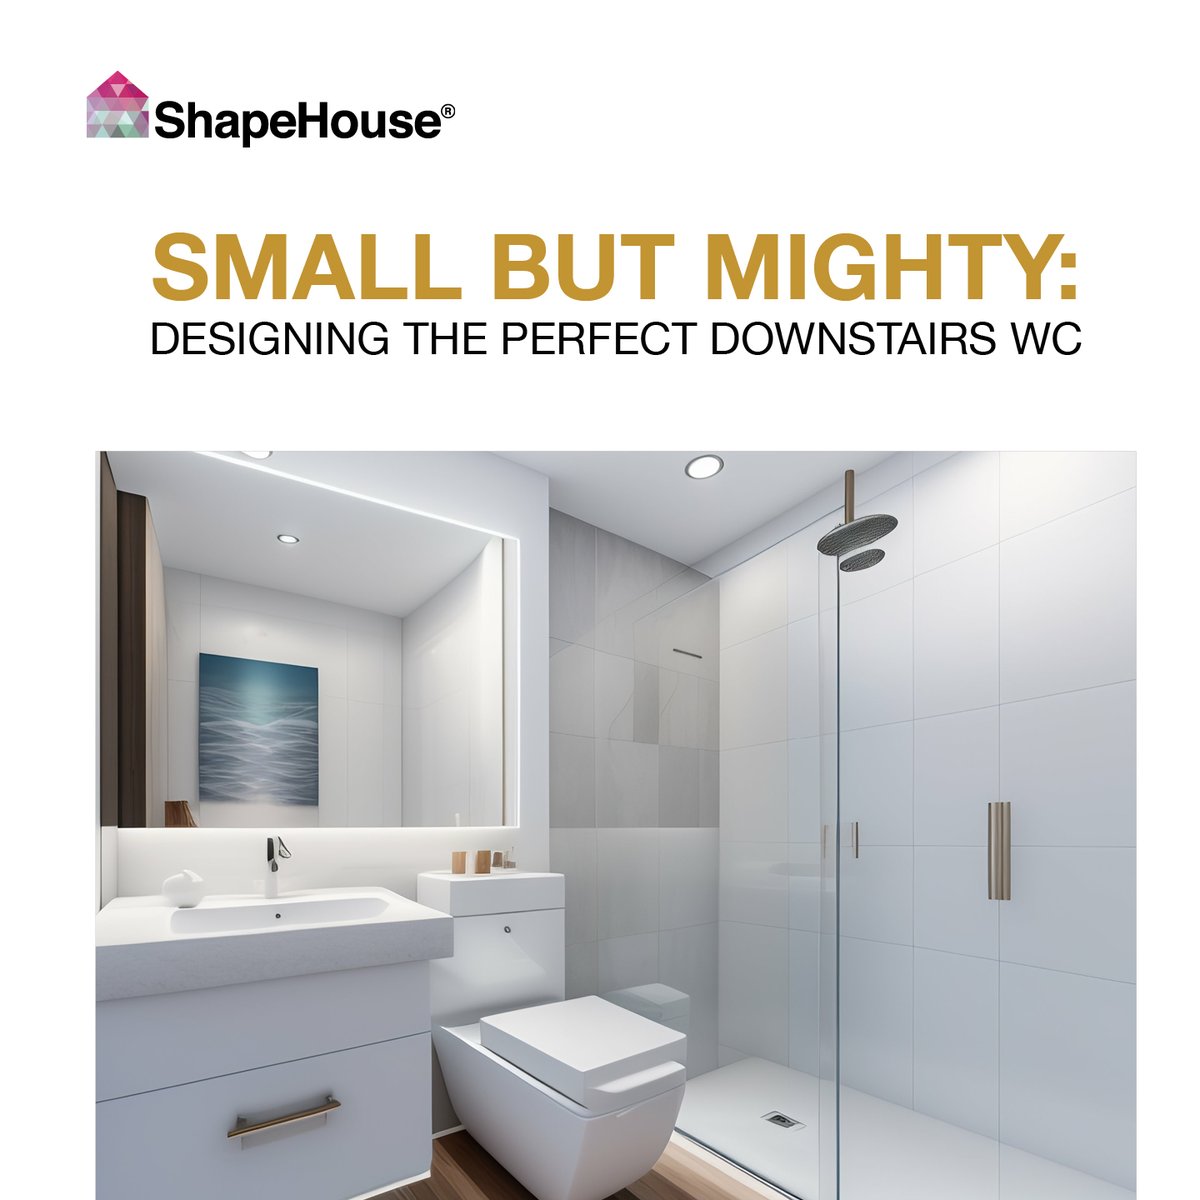 The downstairs WC may seem like an insignificant space, but it serves a vital purpose in the home

#ShapeHouseUK #garageconversions #conversions #renovations #builder #building #design #interiordesign #bathrooms #kitchens #extensions #loftconversions #bootrooms